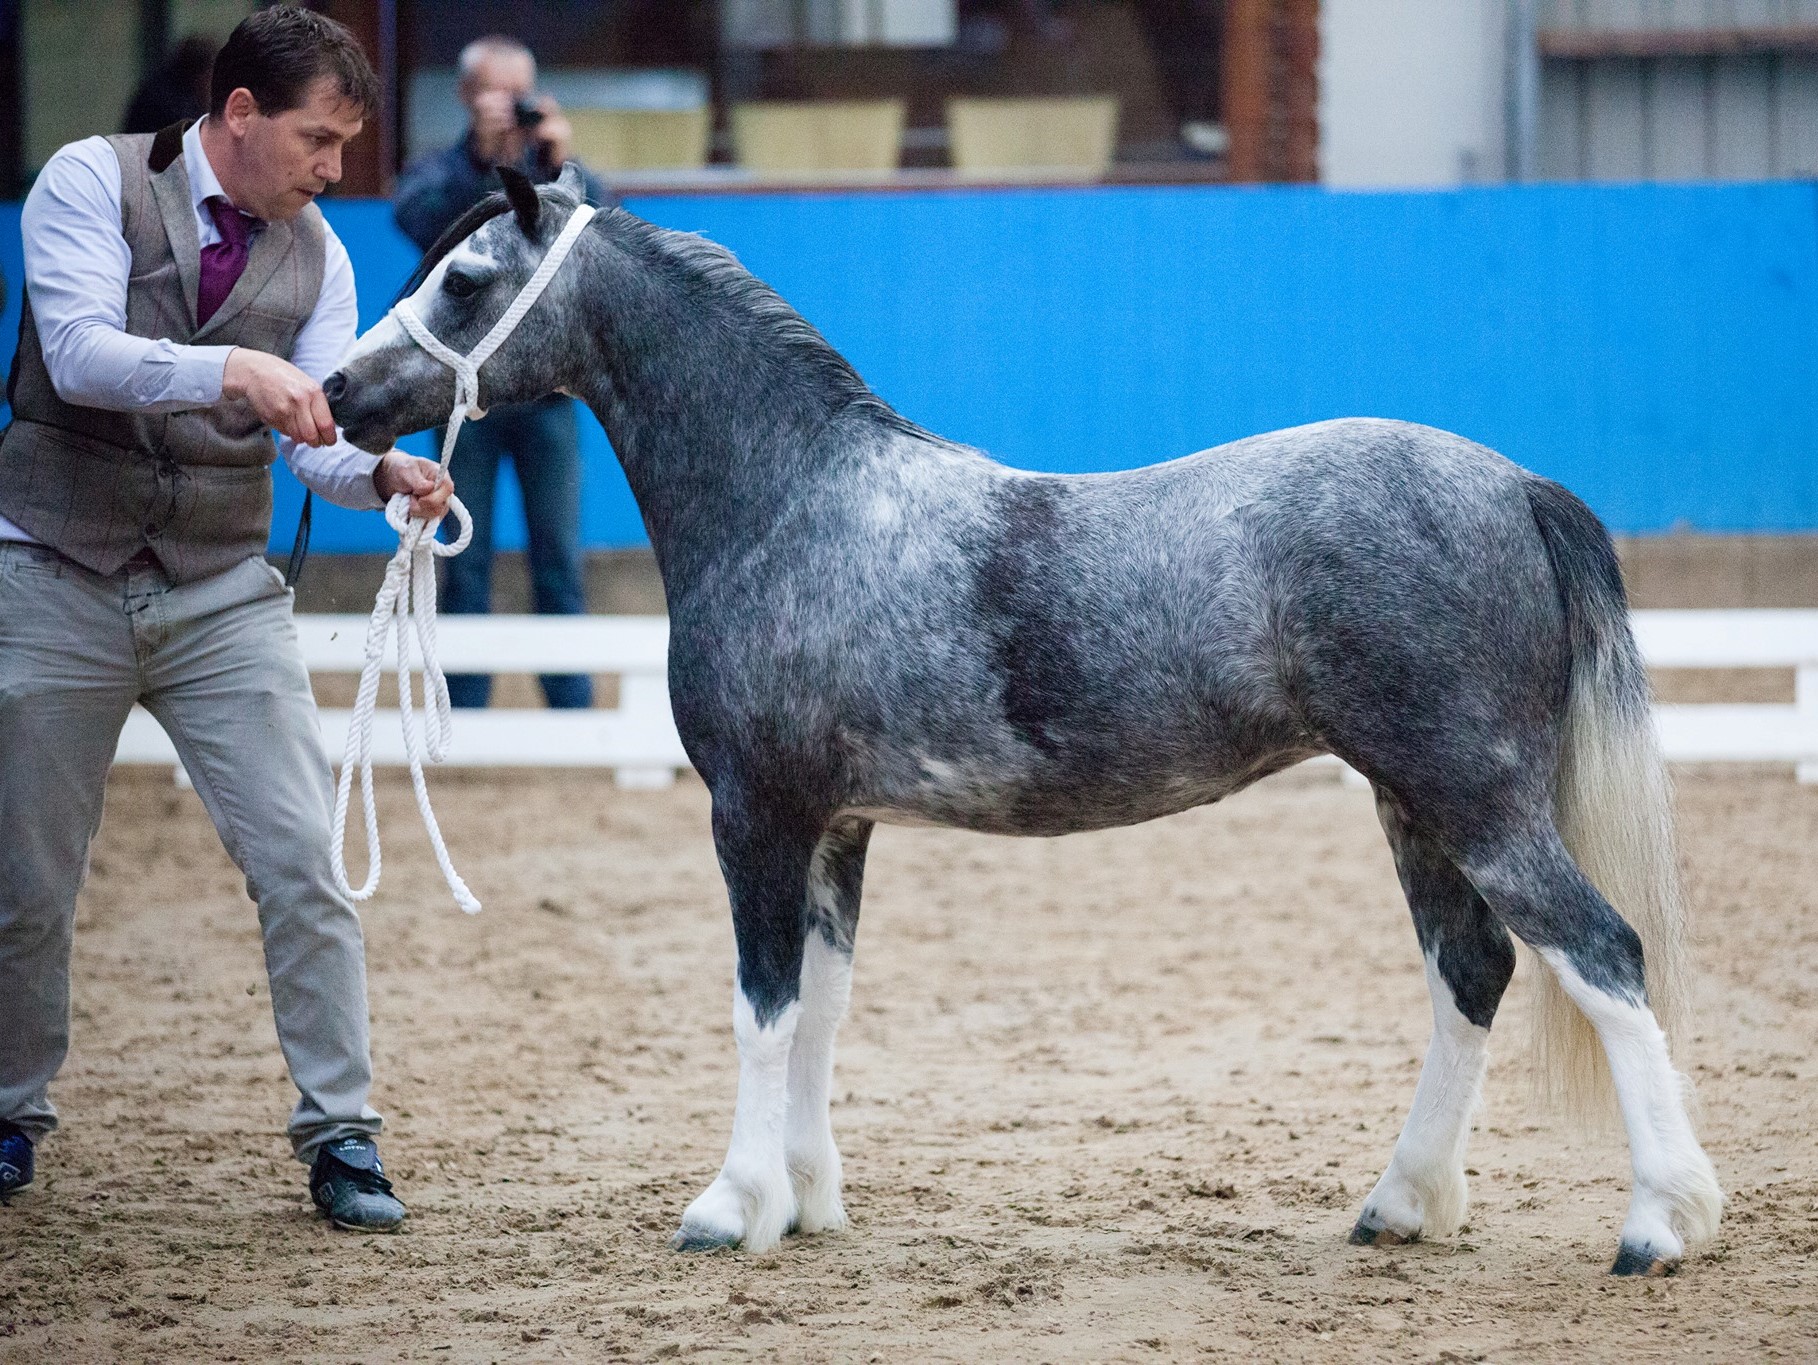 Sumrin Saint Mary wins at the Houten show